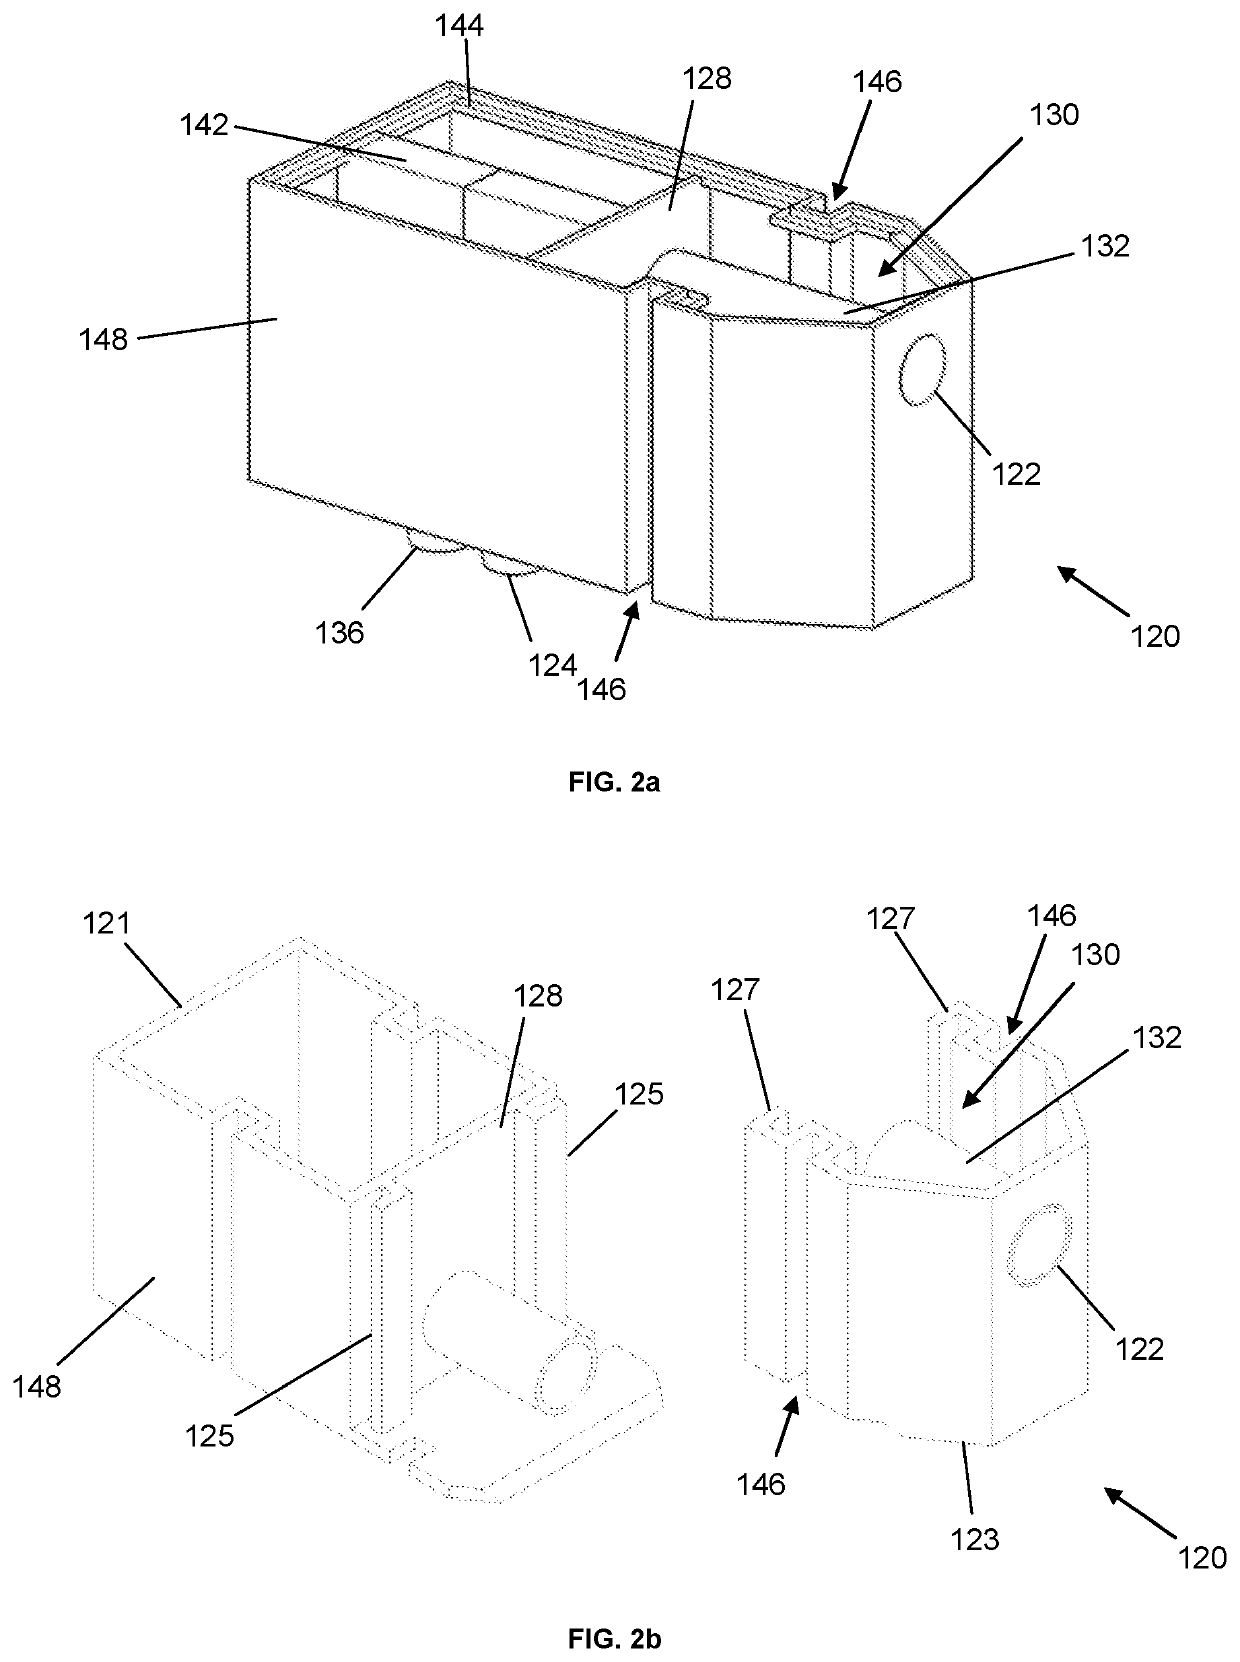 Exhaled breath condensate collection device and a kit of parts therefor